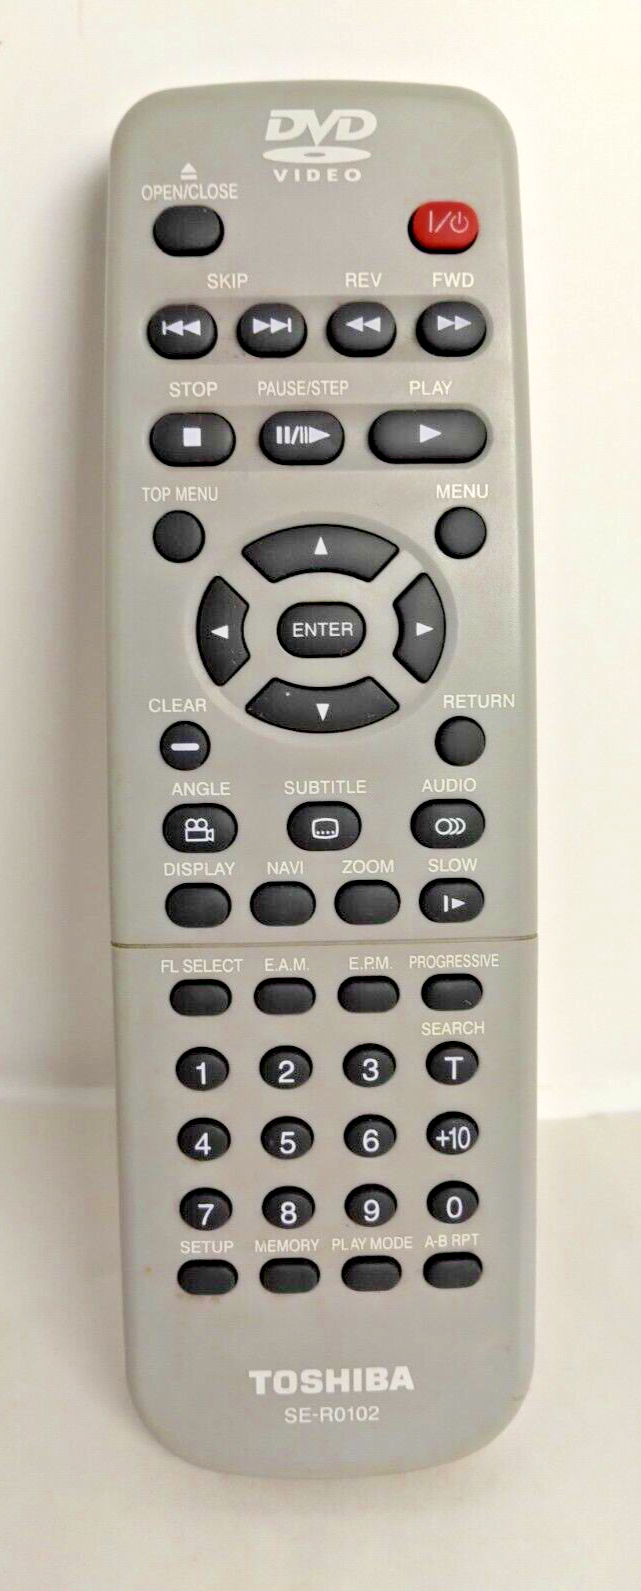 Genuine Toshiba SE-R0102 DVD Video Remote Control OEM -  Cleaned/Tested Function - $16.54